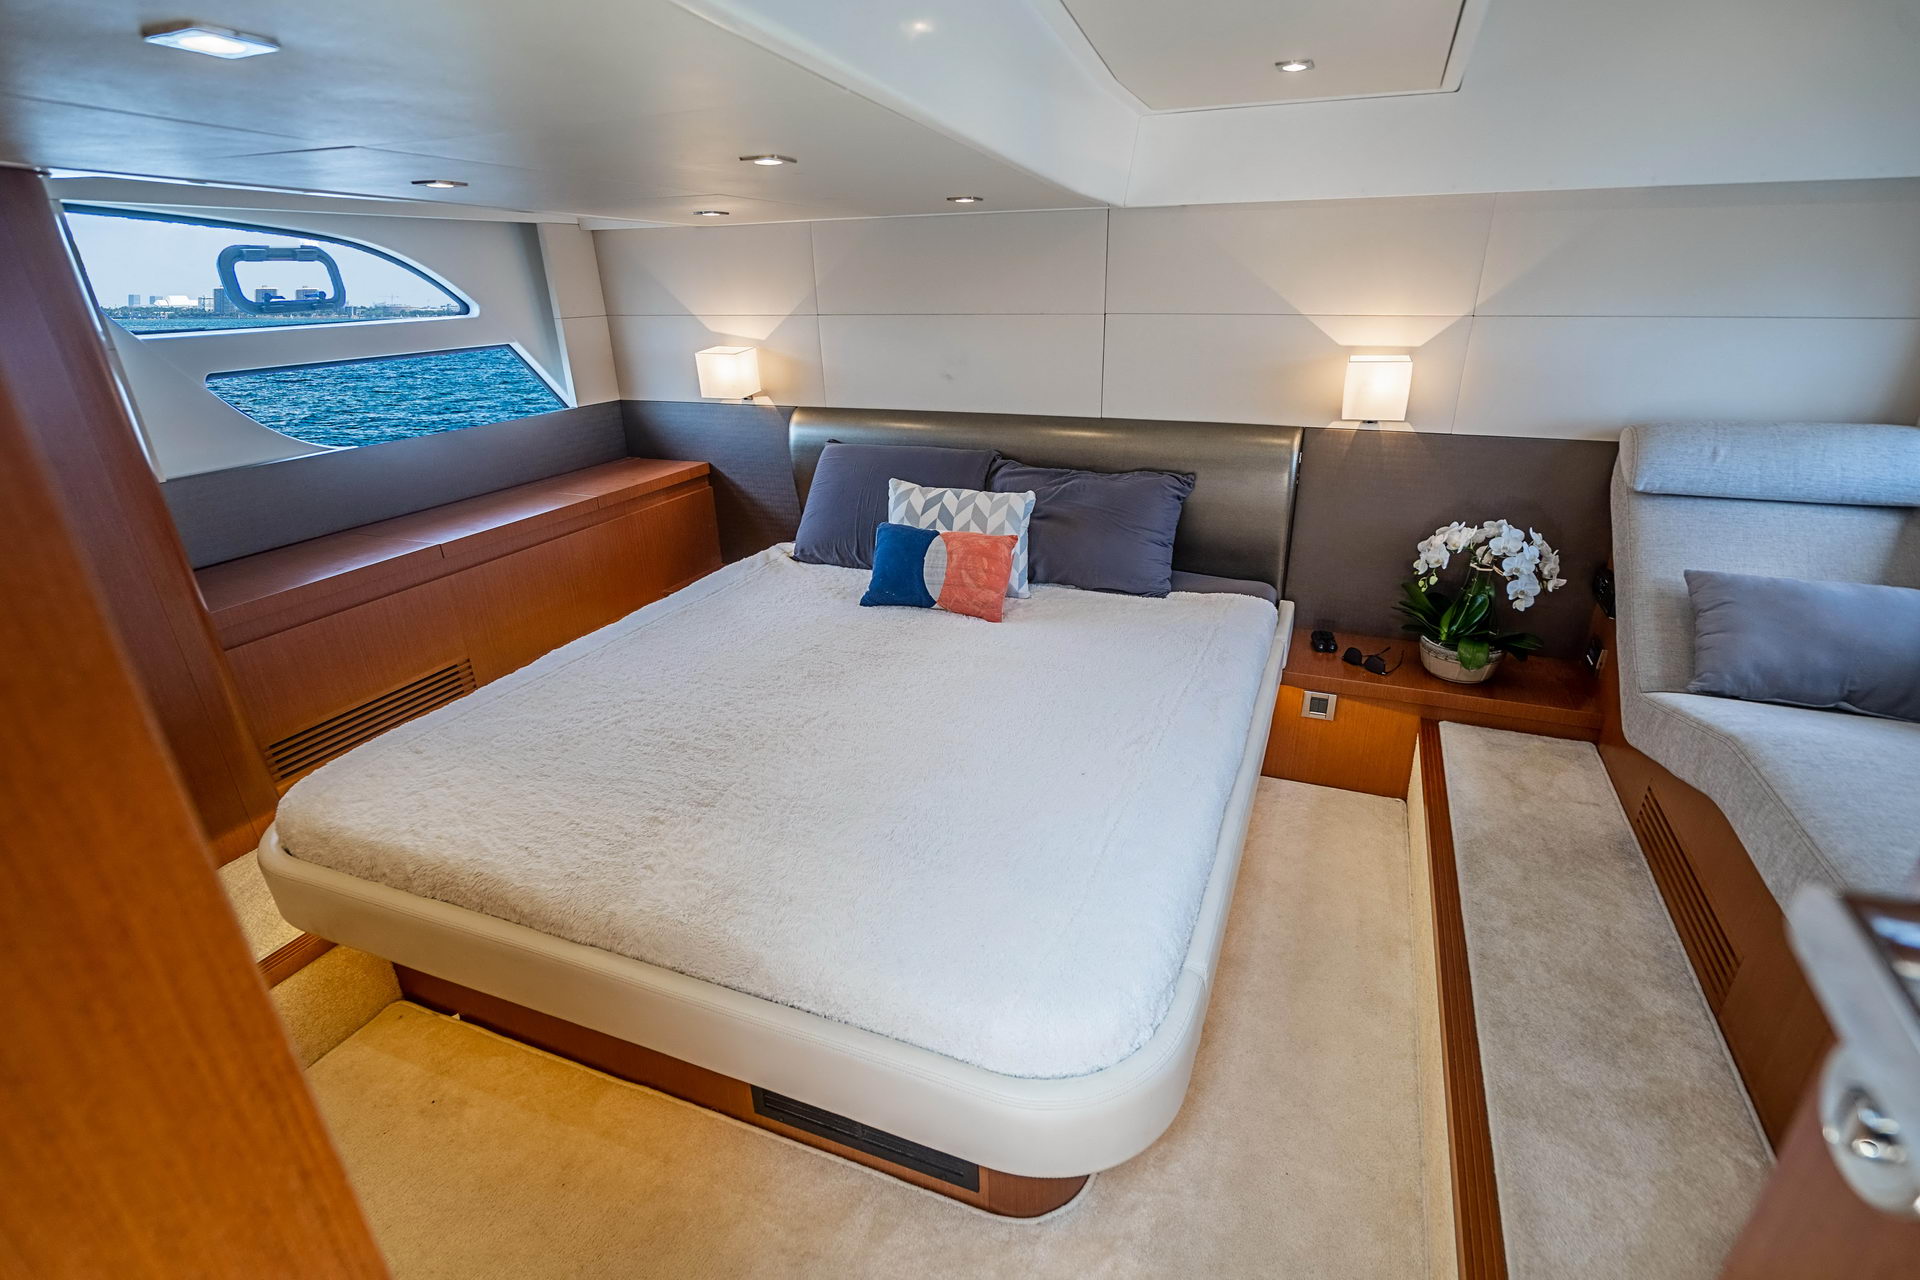 bedgoals have been met on this Beneteau GT46! This room looks so sleek,  cool, chic and contemporary. We loved this project! . . . #ya…